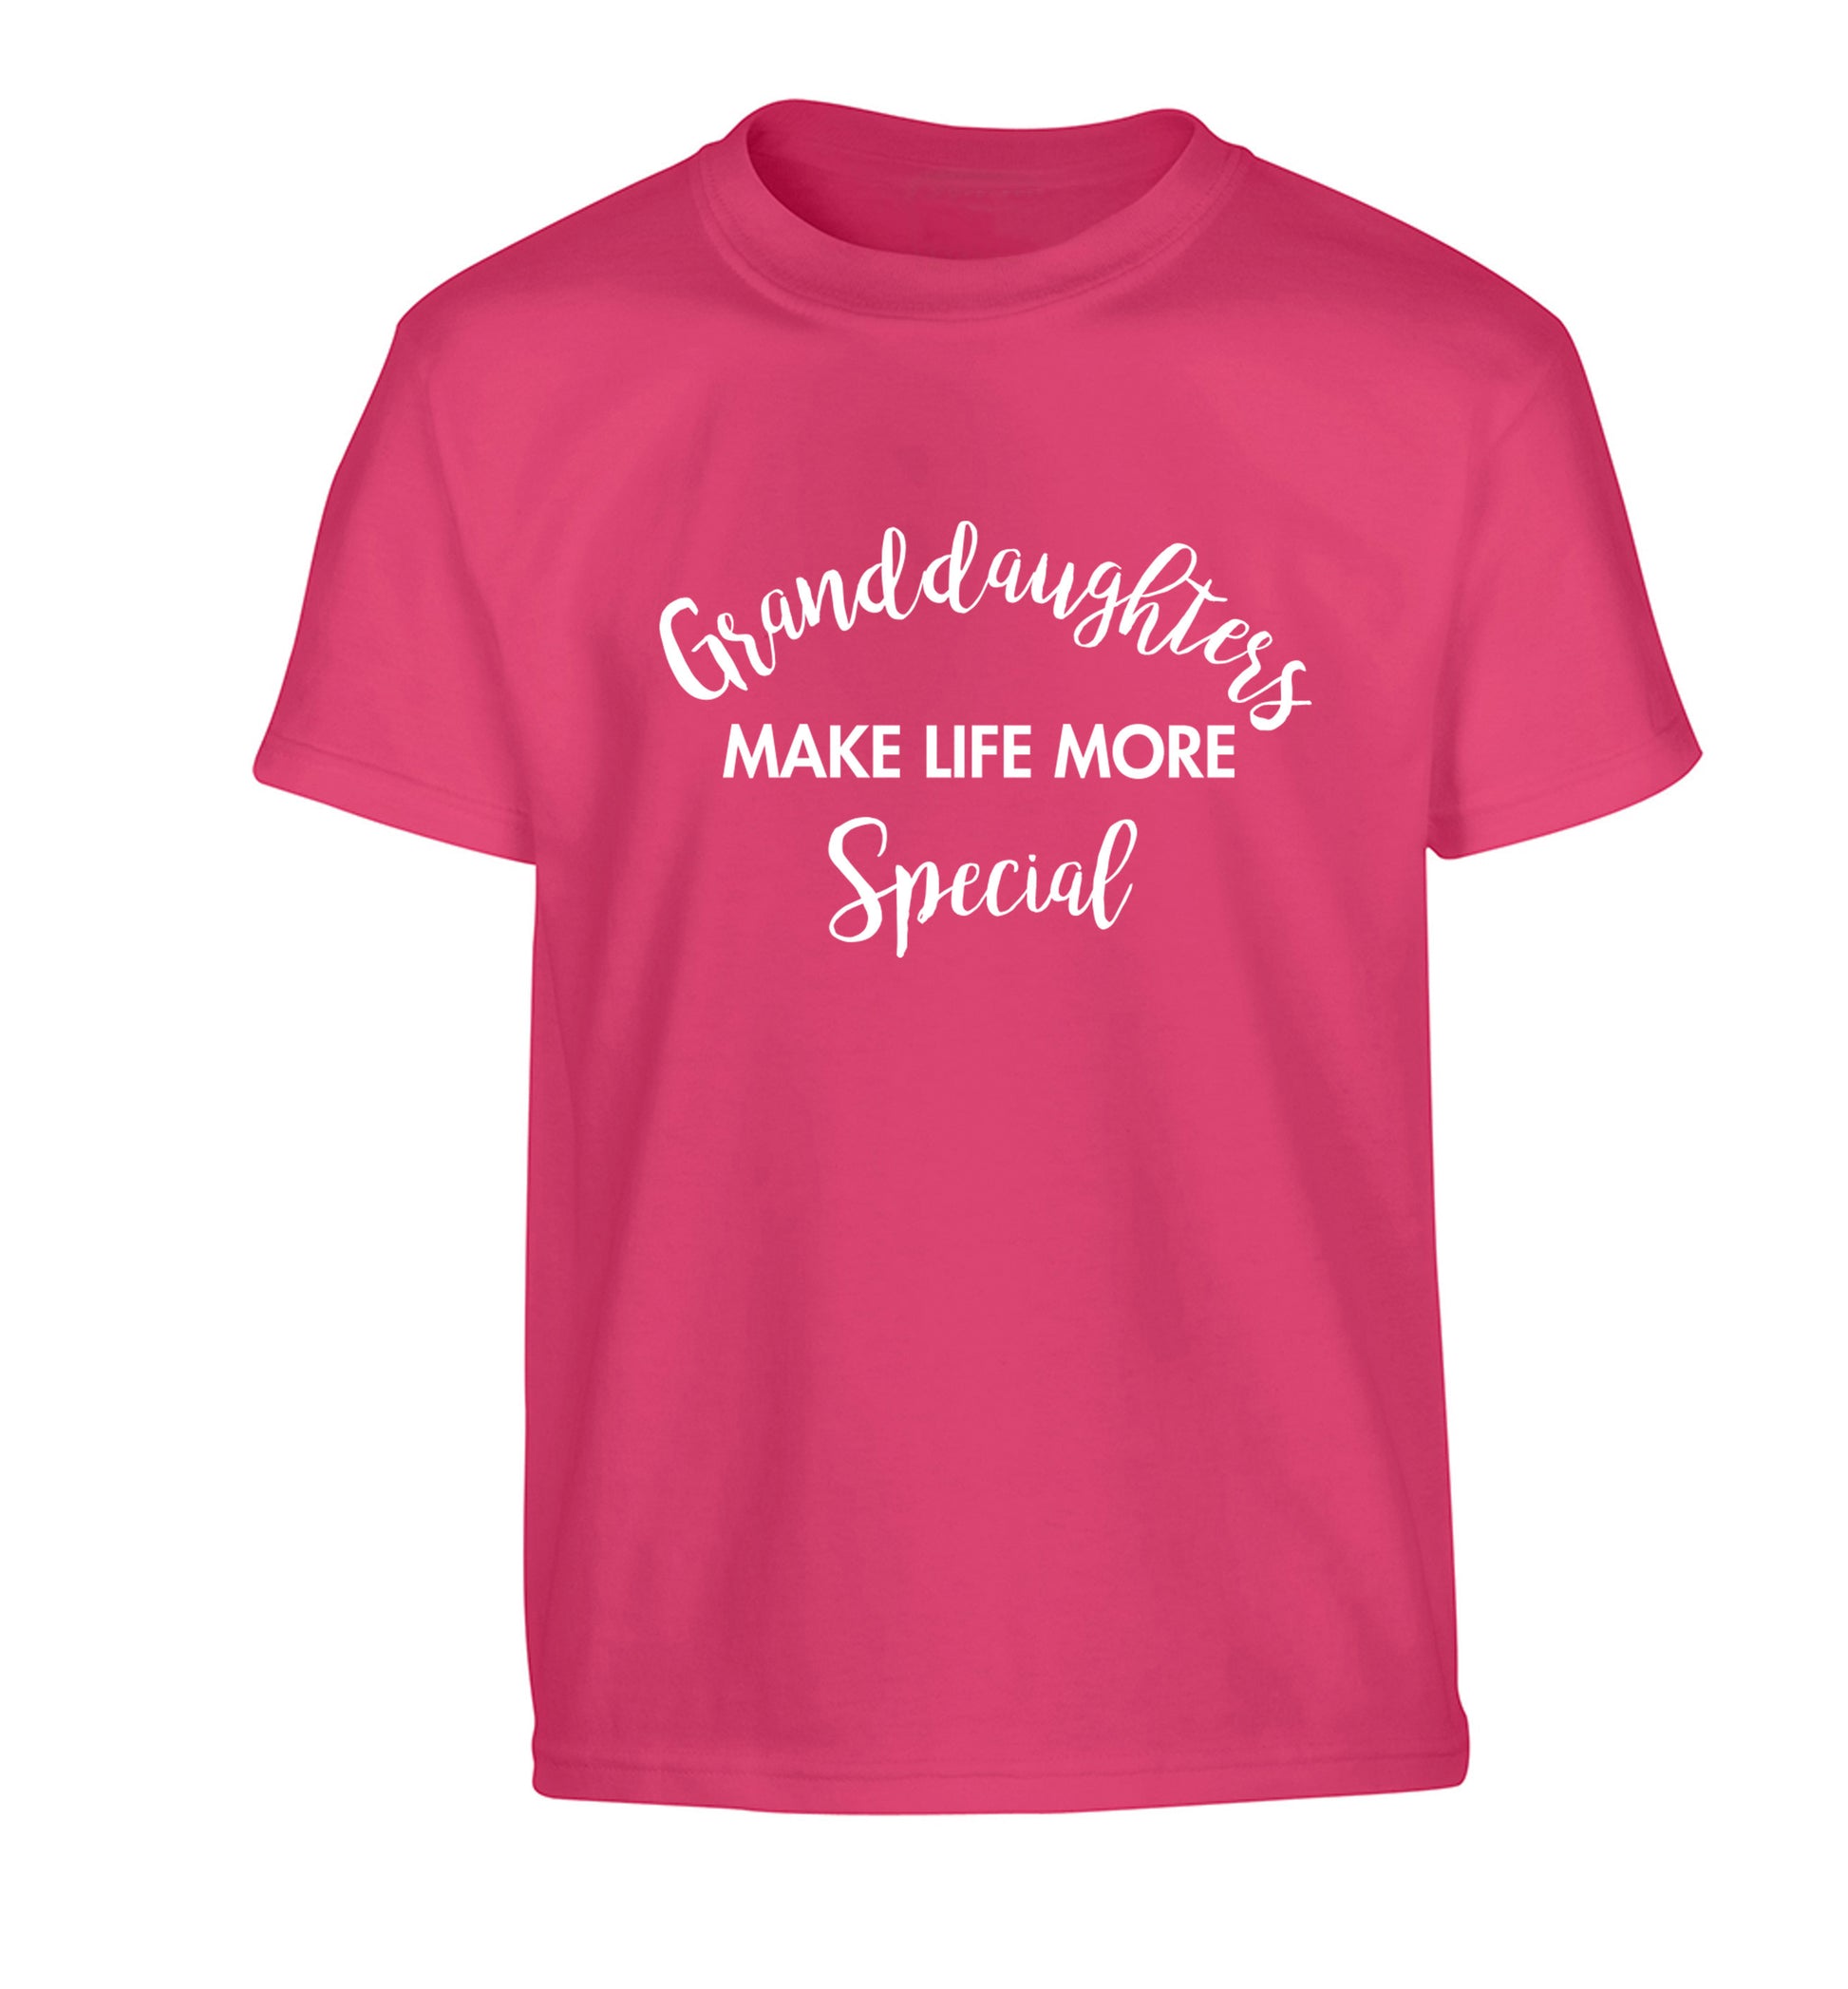 Granddaughters make life more special Children's pink Tshirt 12-14 Years